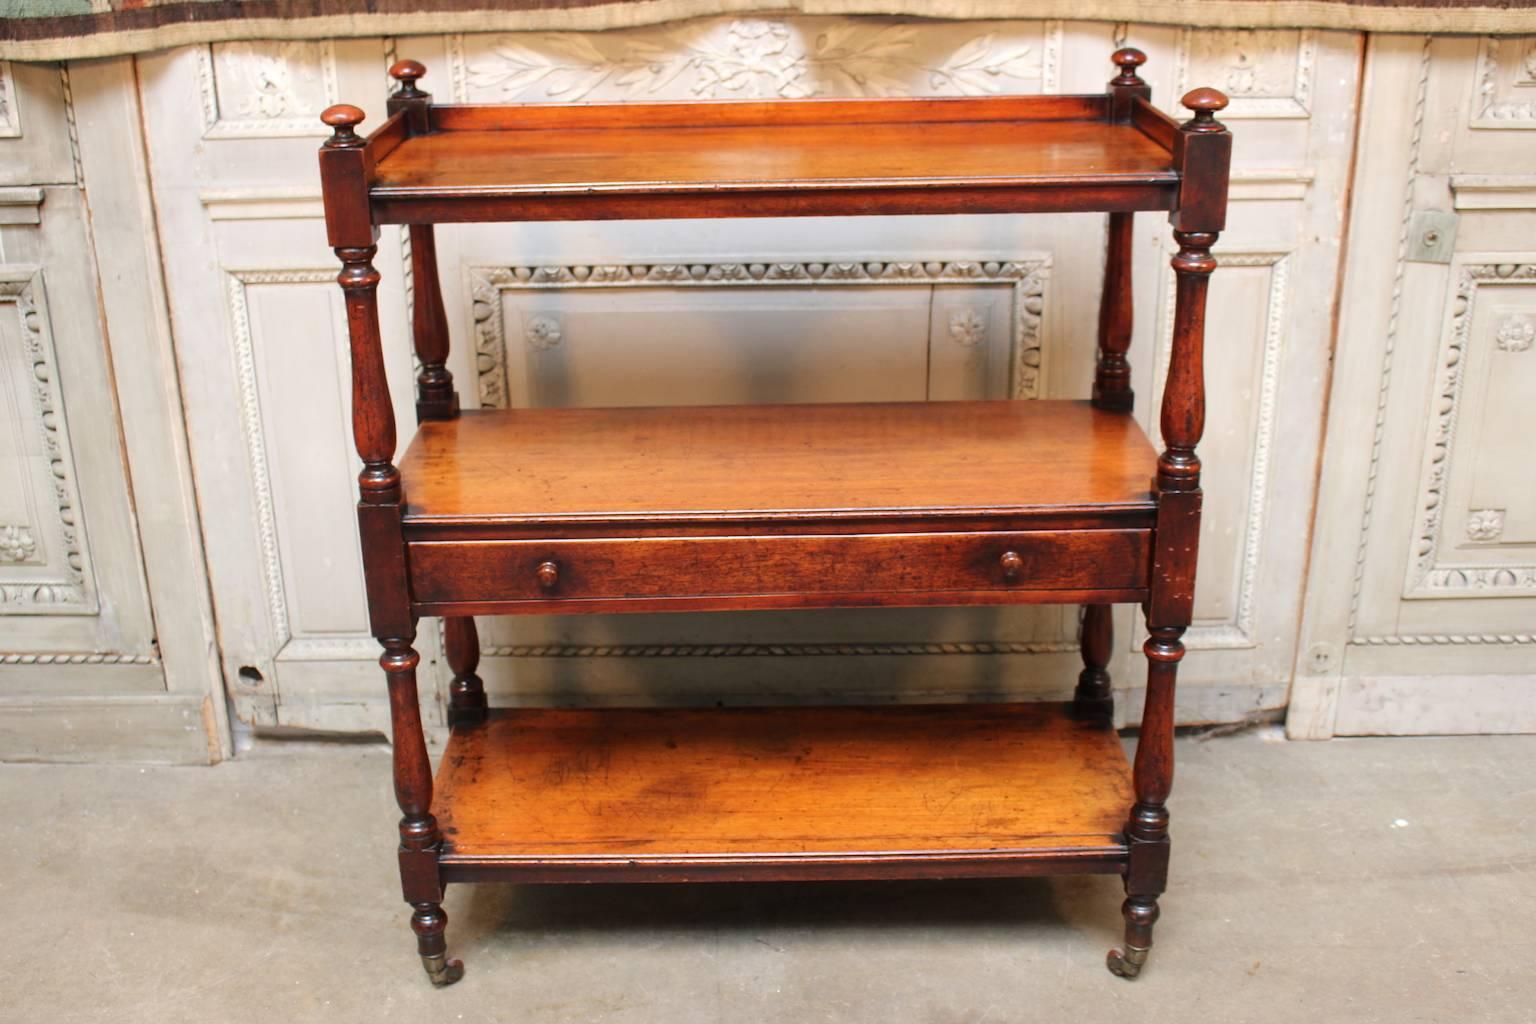 A small scale English Victorian three-tiered trolley with a drawer in mahogany